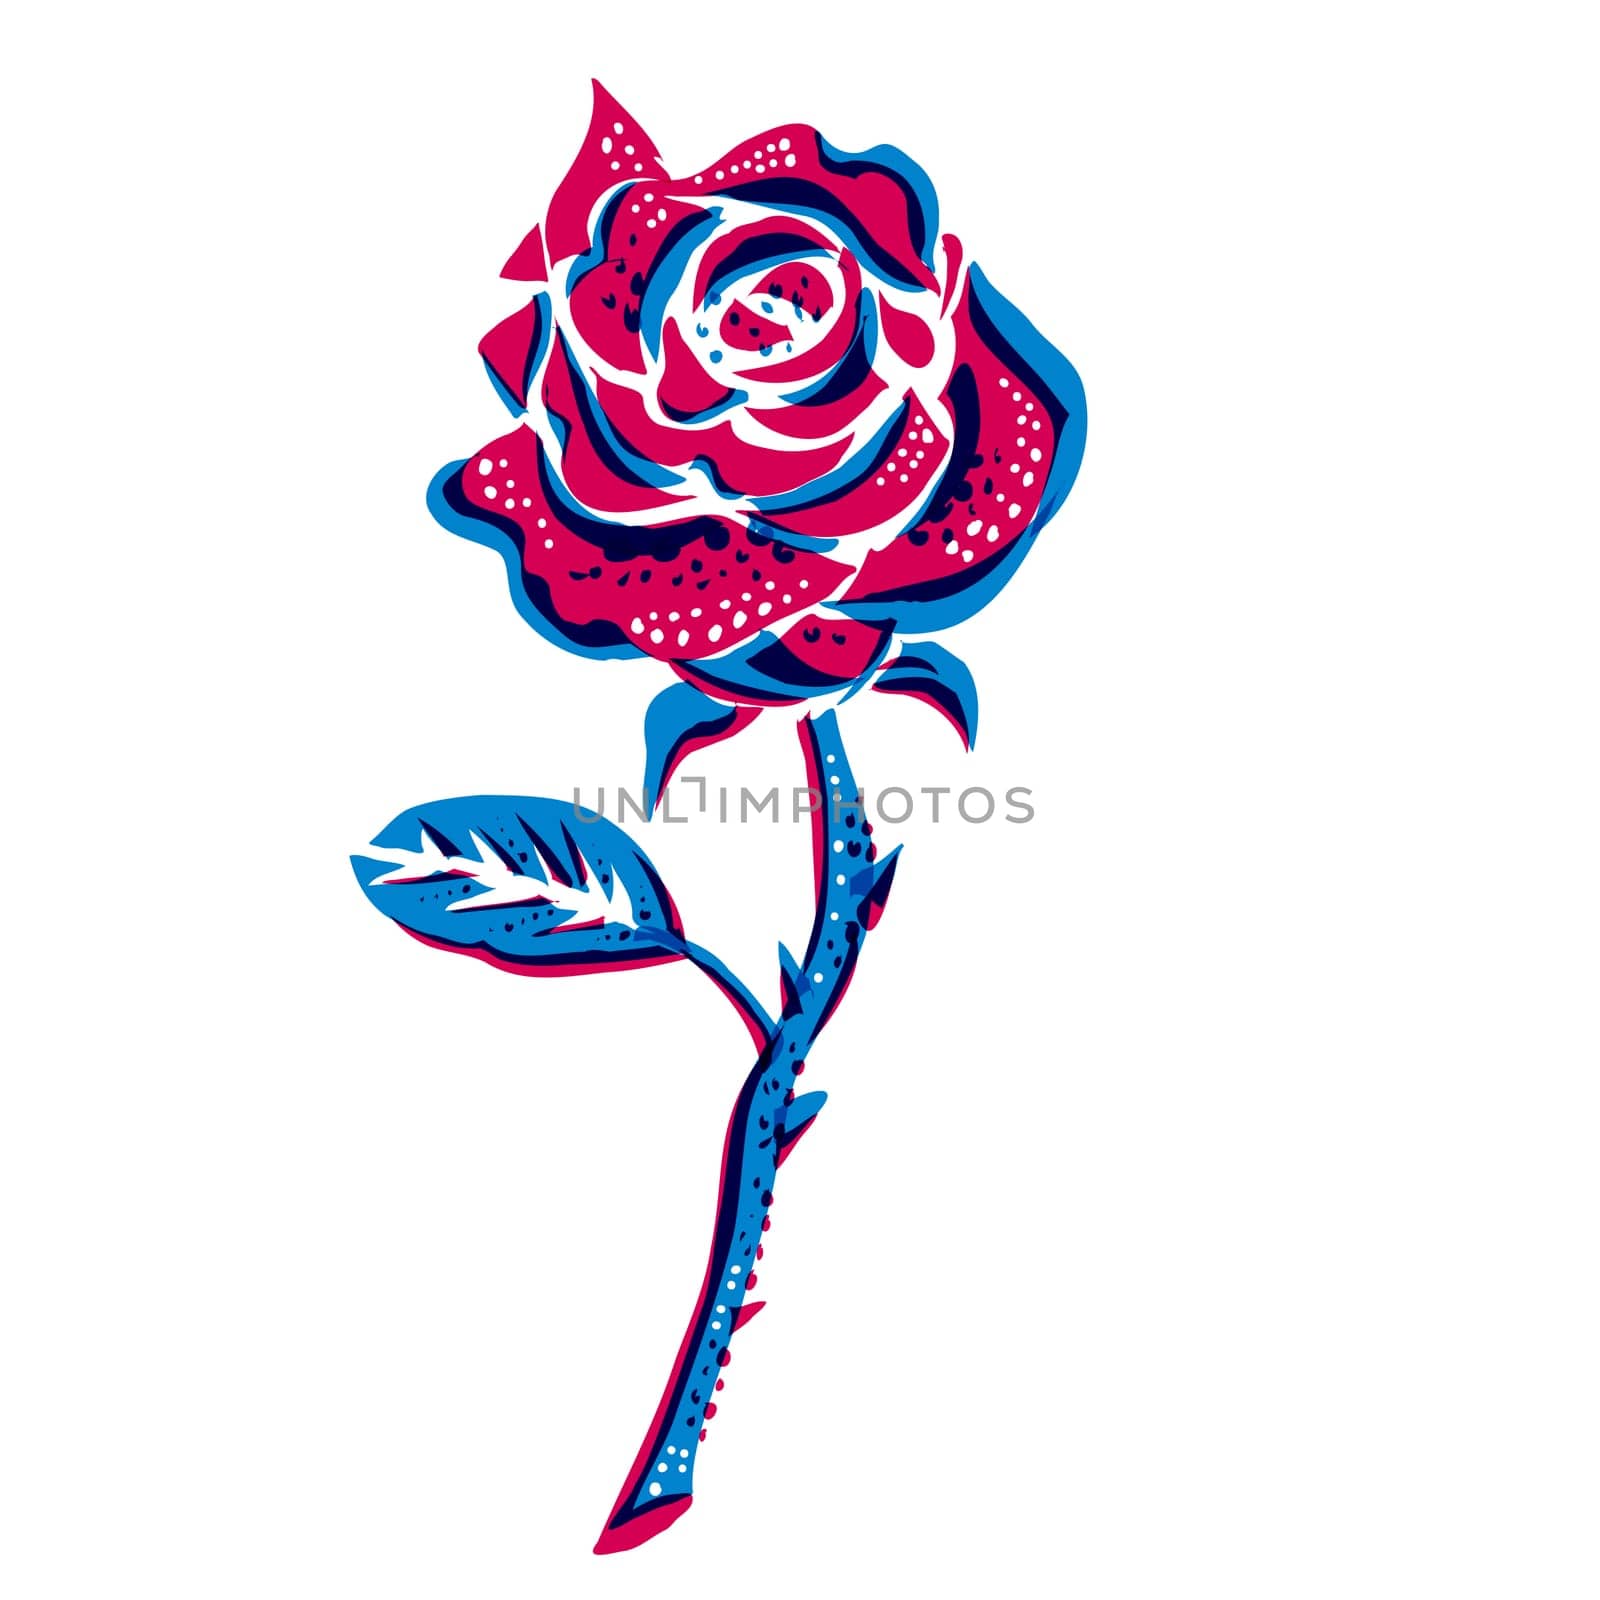 Red Rose with Stem Risograph by patrimonio